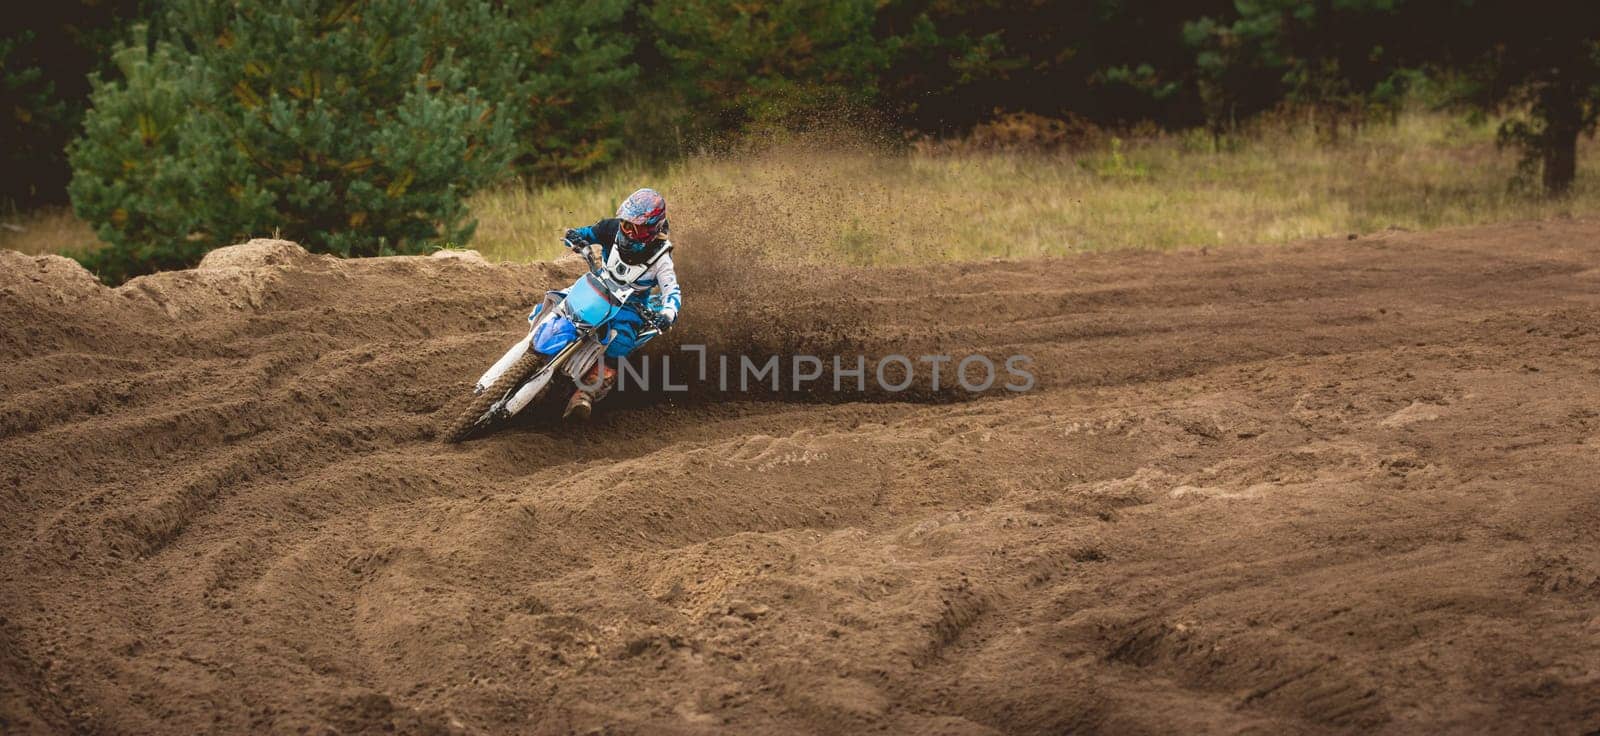 Moto cross - MX girl biker at race in Russia - a sharp turn and the spray of dirt by Studia72